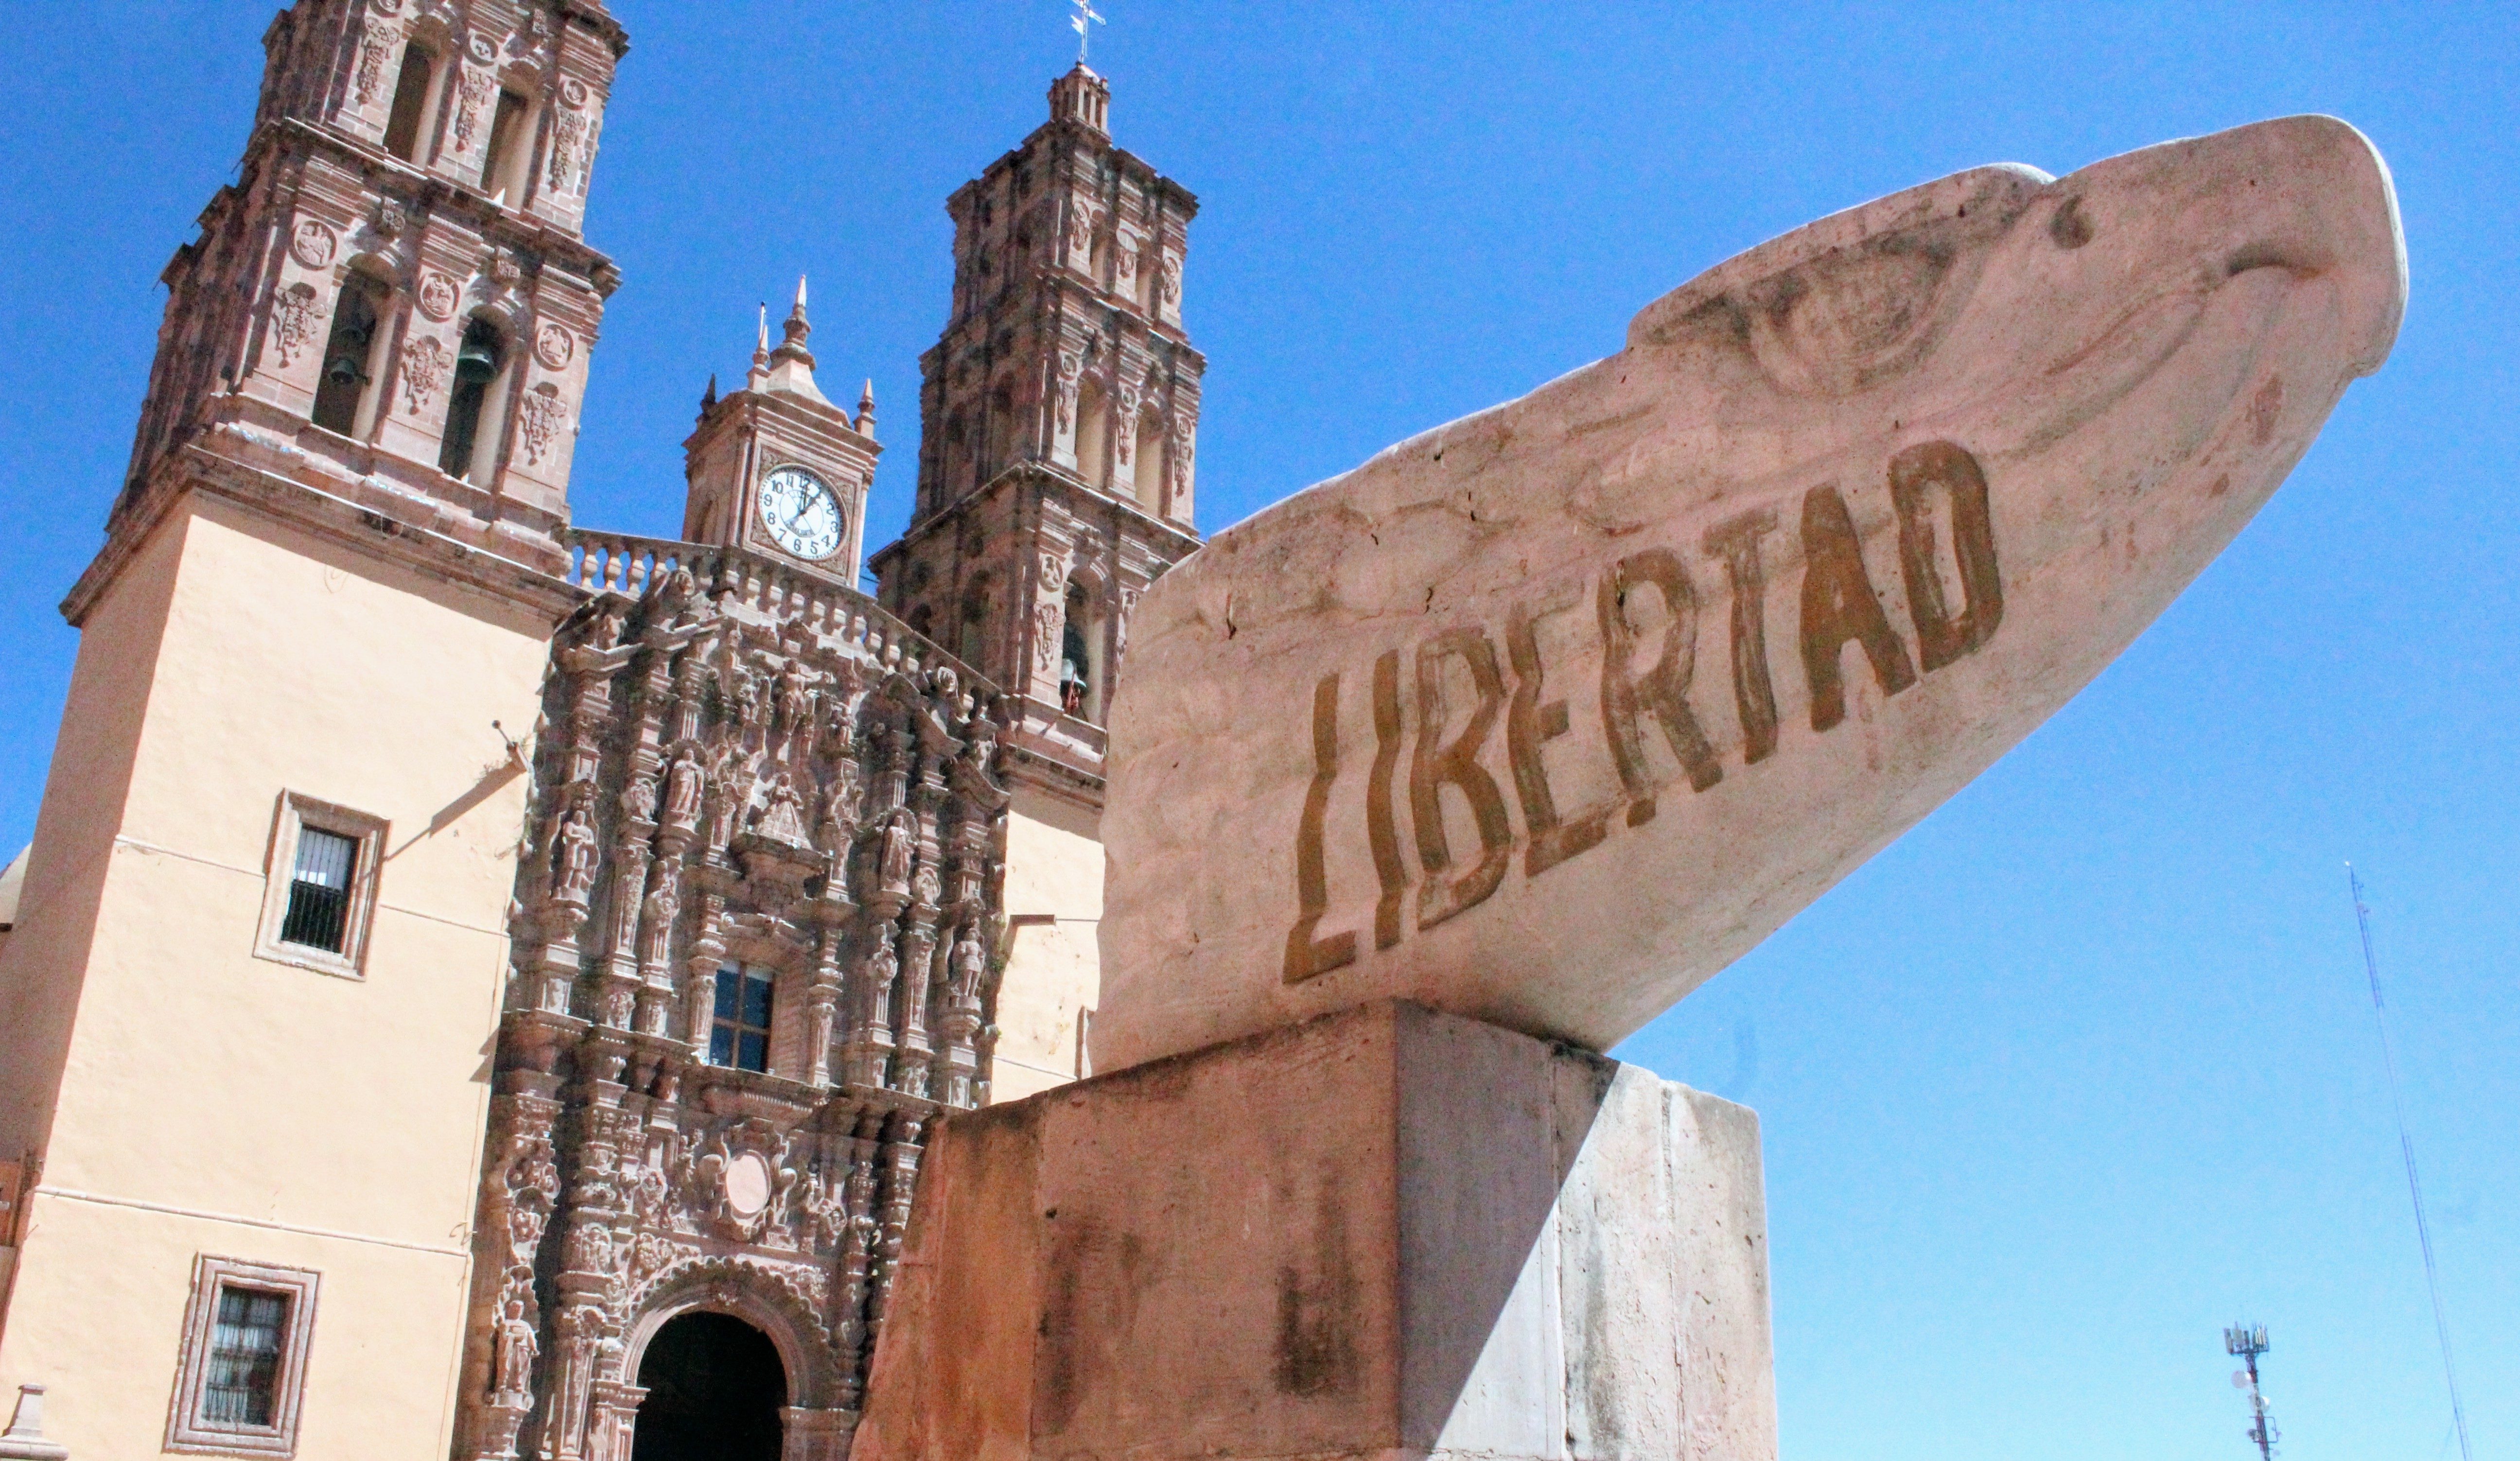 Dolores Hidalgo, The Birthplace of Mexican Independence - Mike Polischuk